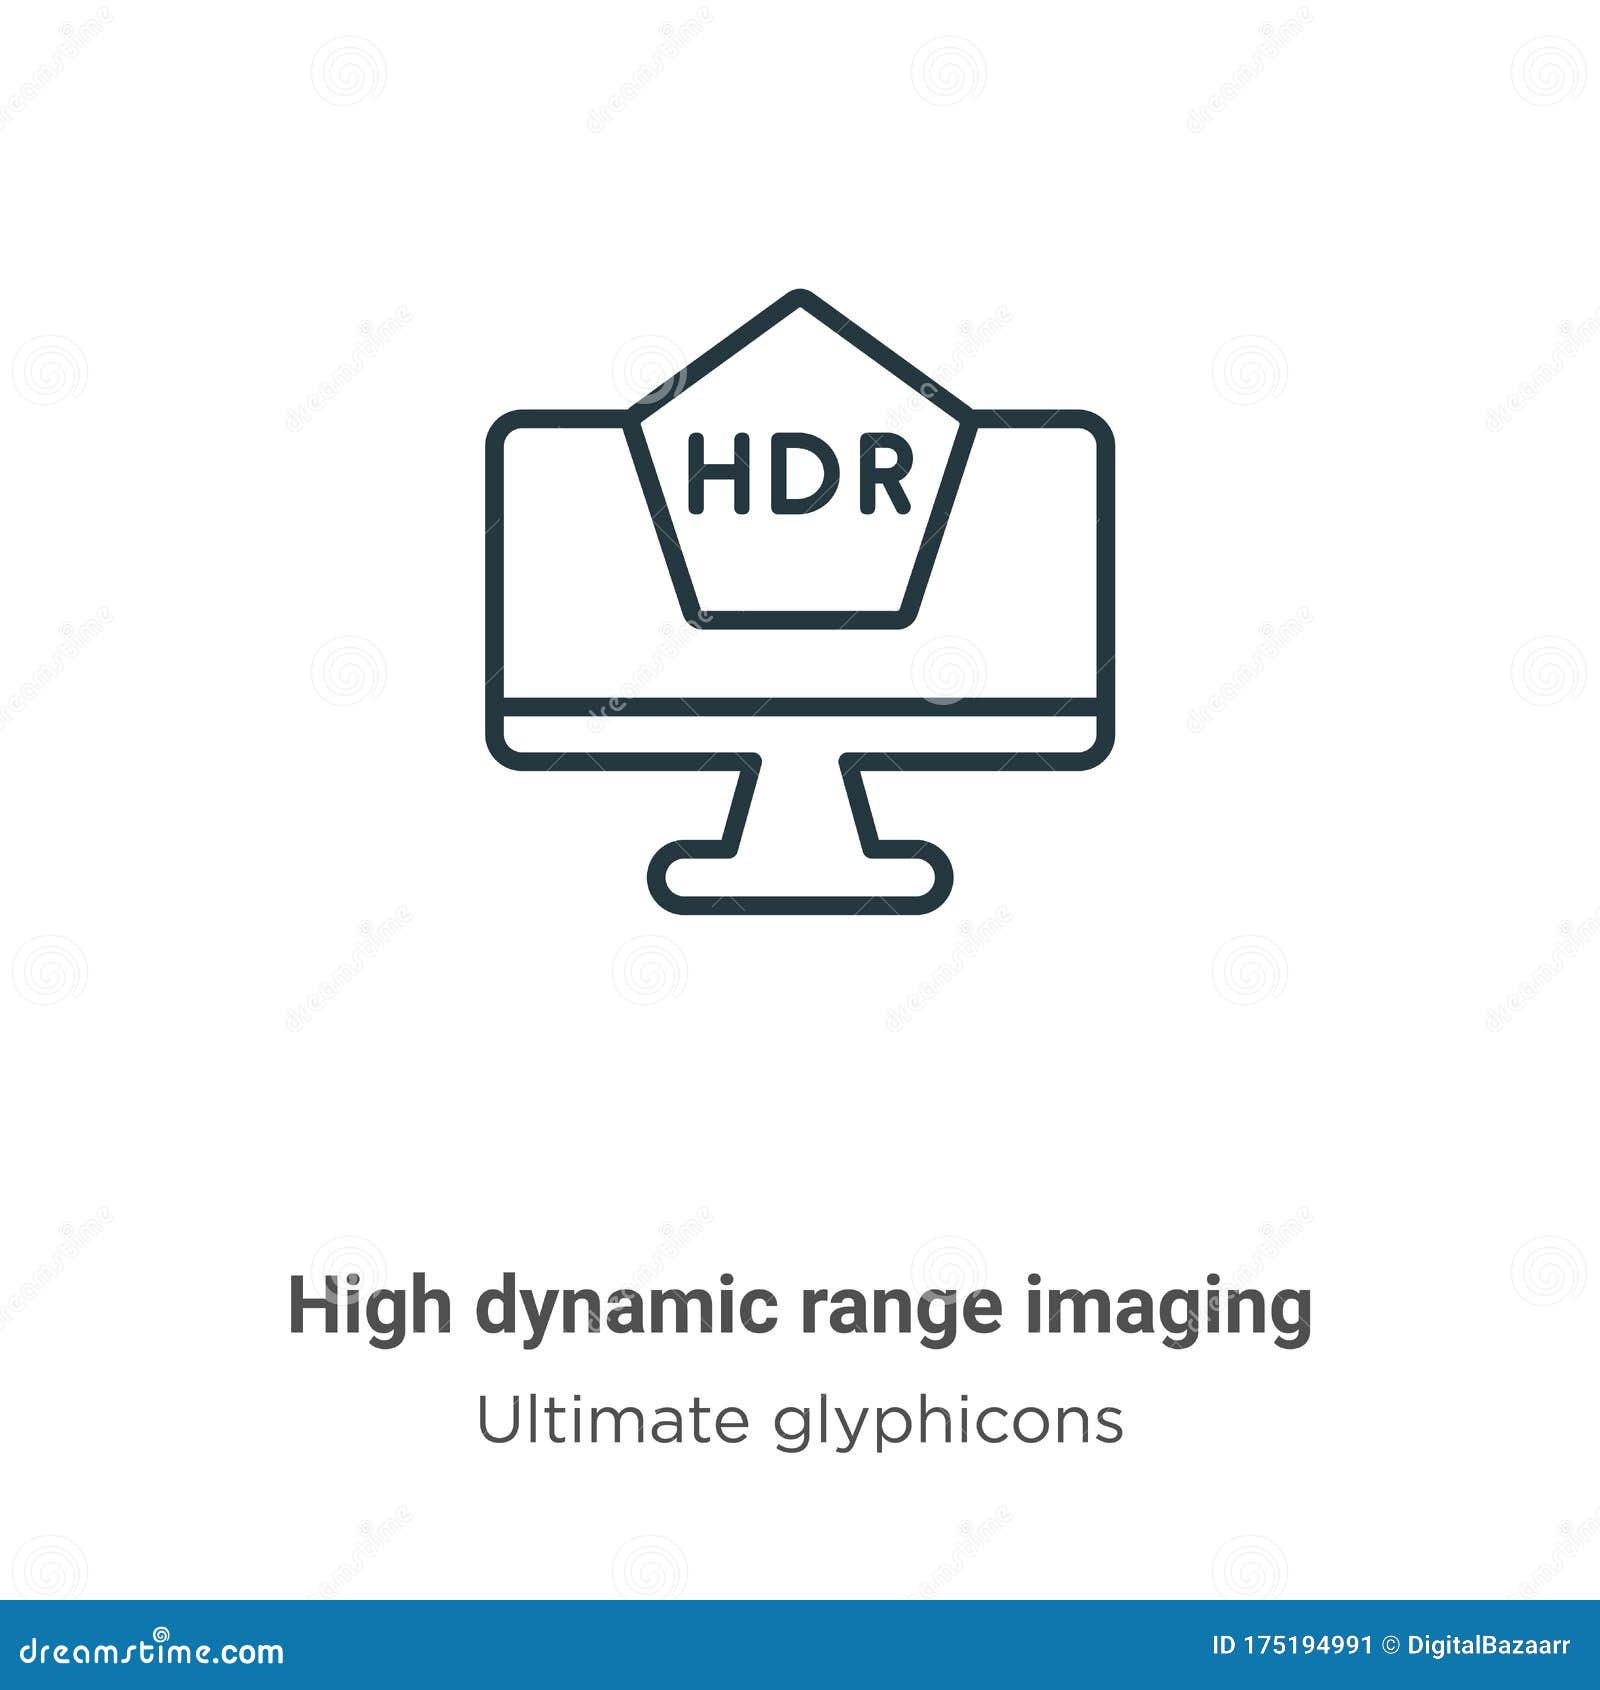 high dynamic range imaging outline  icon. thin line black high dynamic range imaging icon, flat  simple 